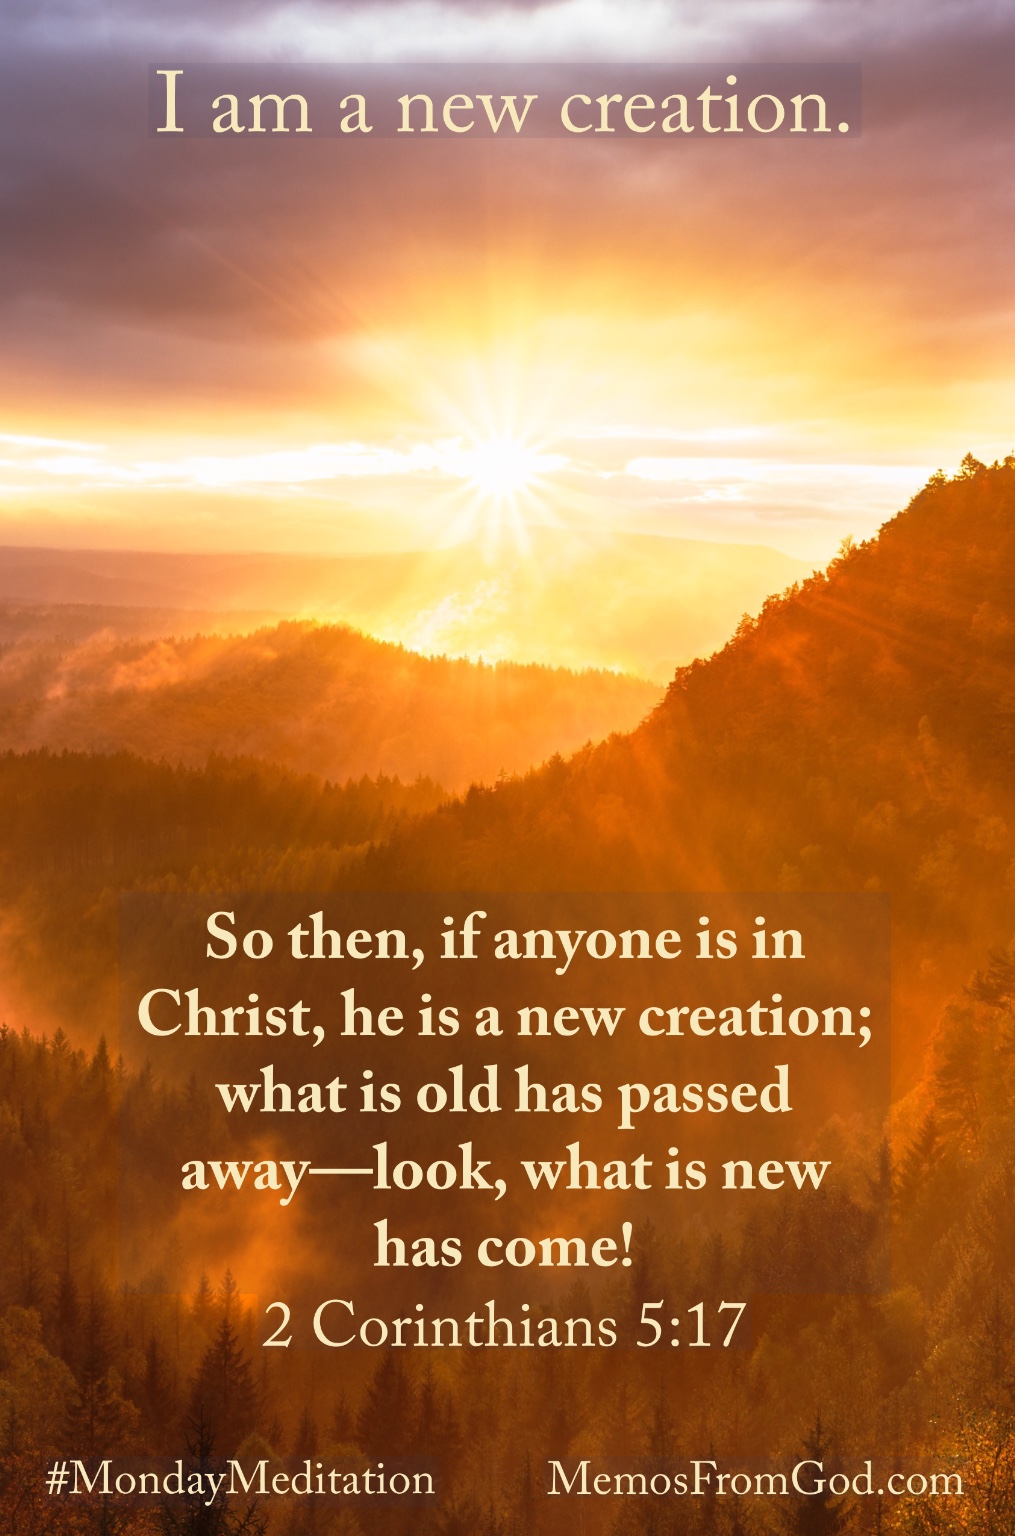 Sunrise in a cloudy sky over tree-covered mountains. Caption: 17 So then, if anyone is in Christ, he is a new creation; what is old has passed away—look, what is new has come! 2 Corinthians 5:17